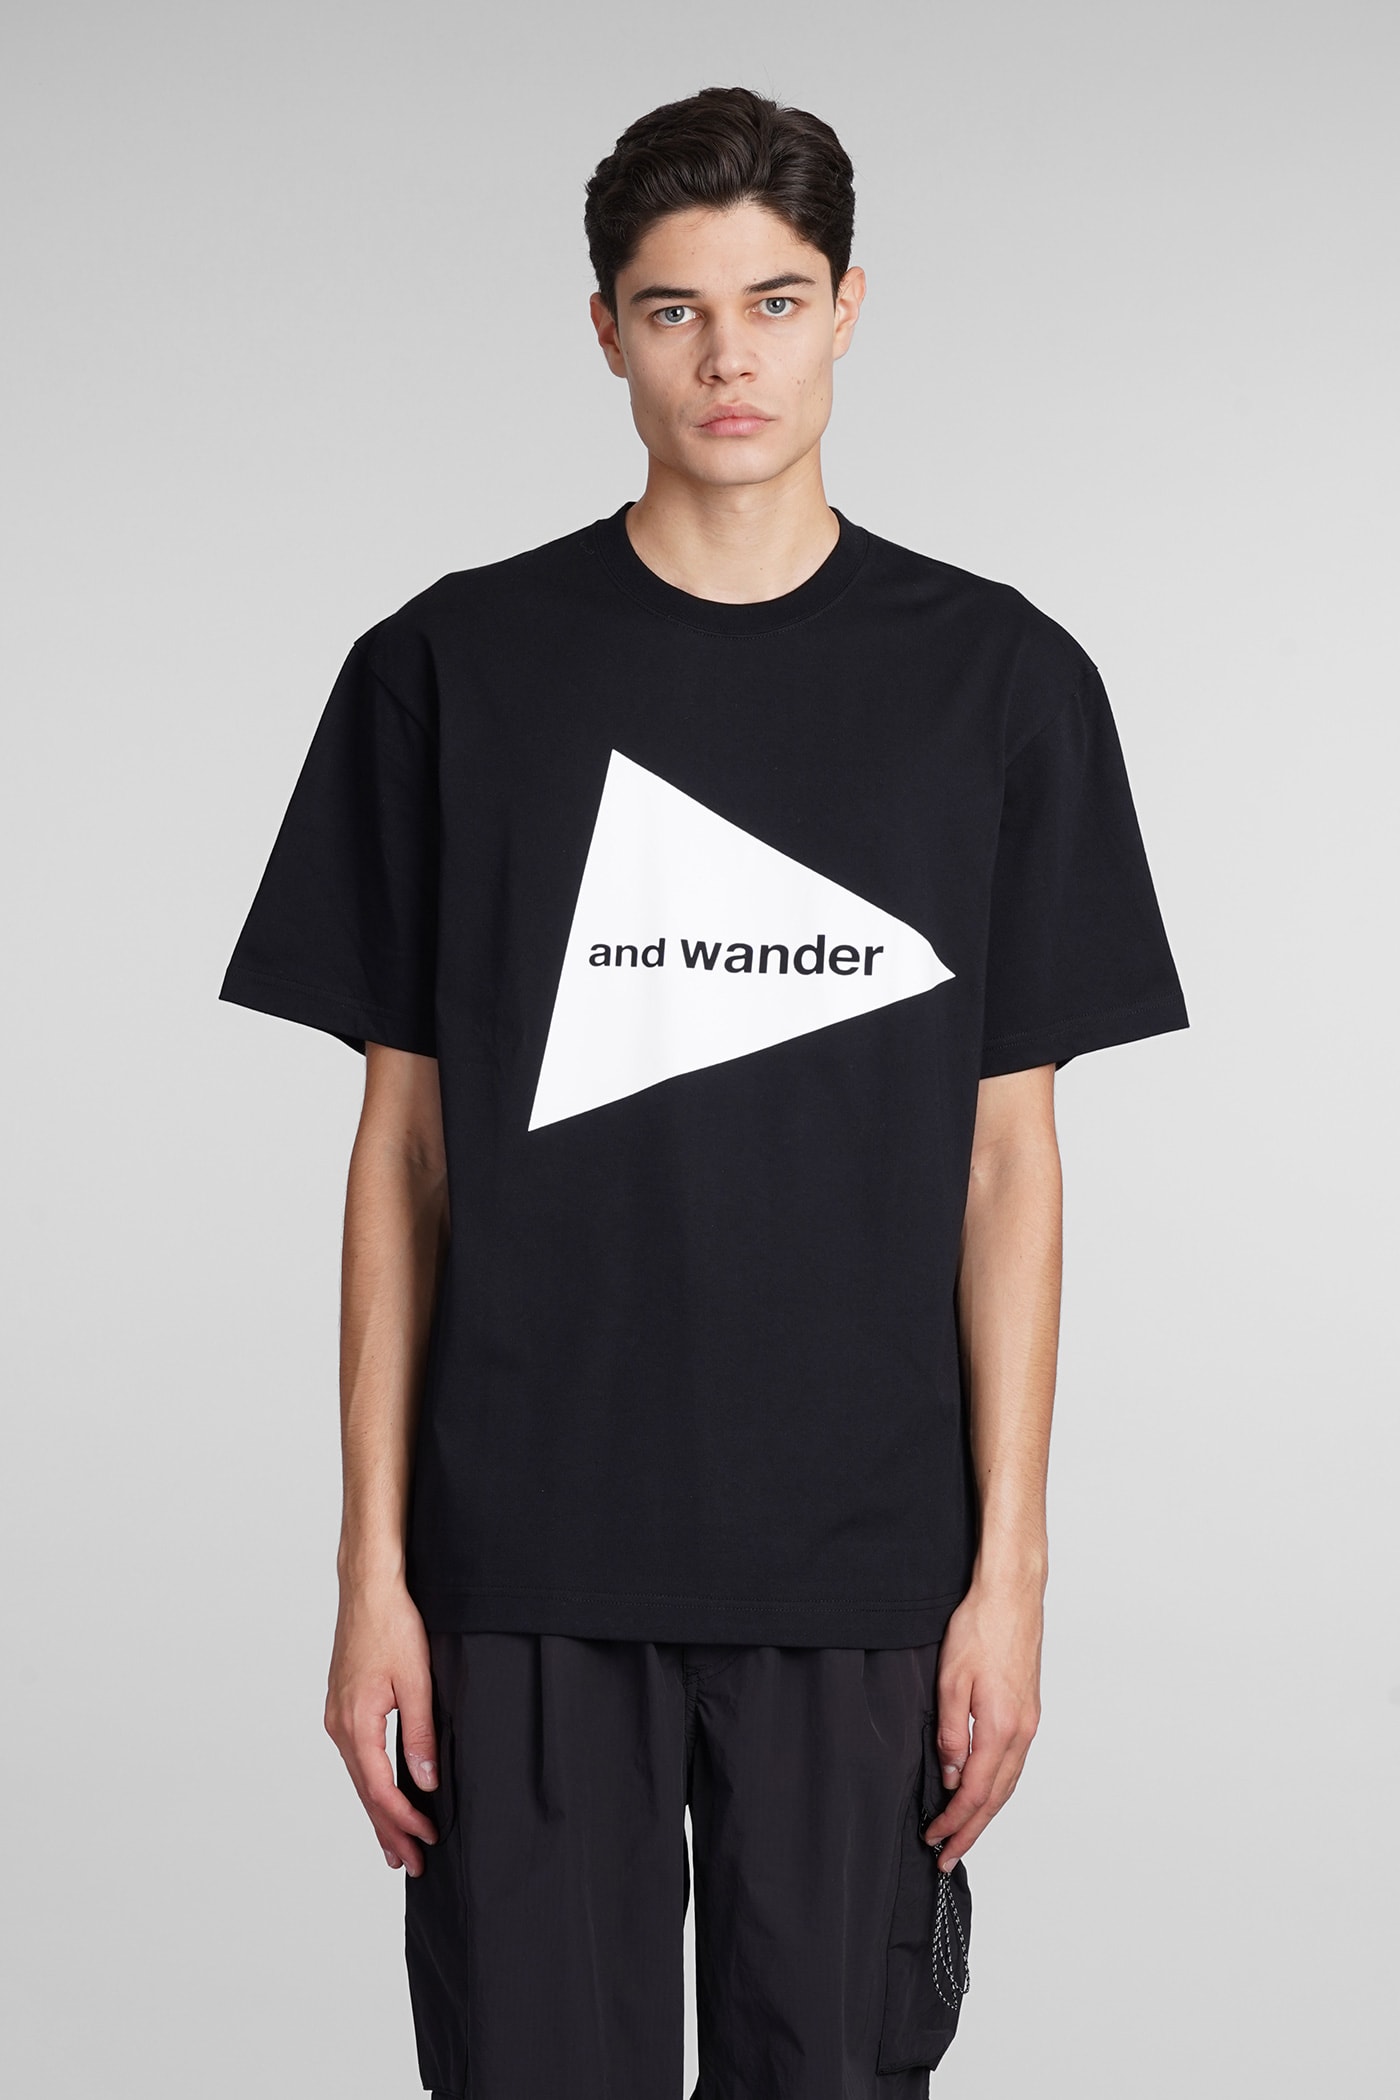 AND WANDER T-SHIRT IN BLACK COTTON